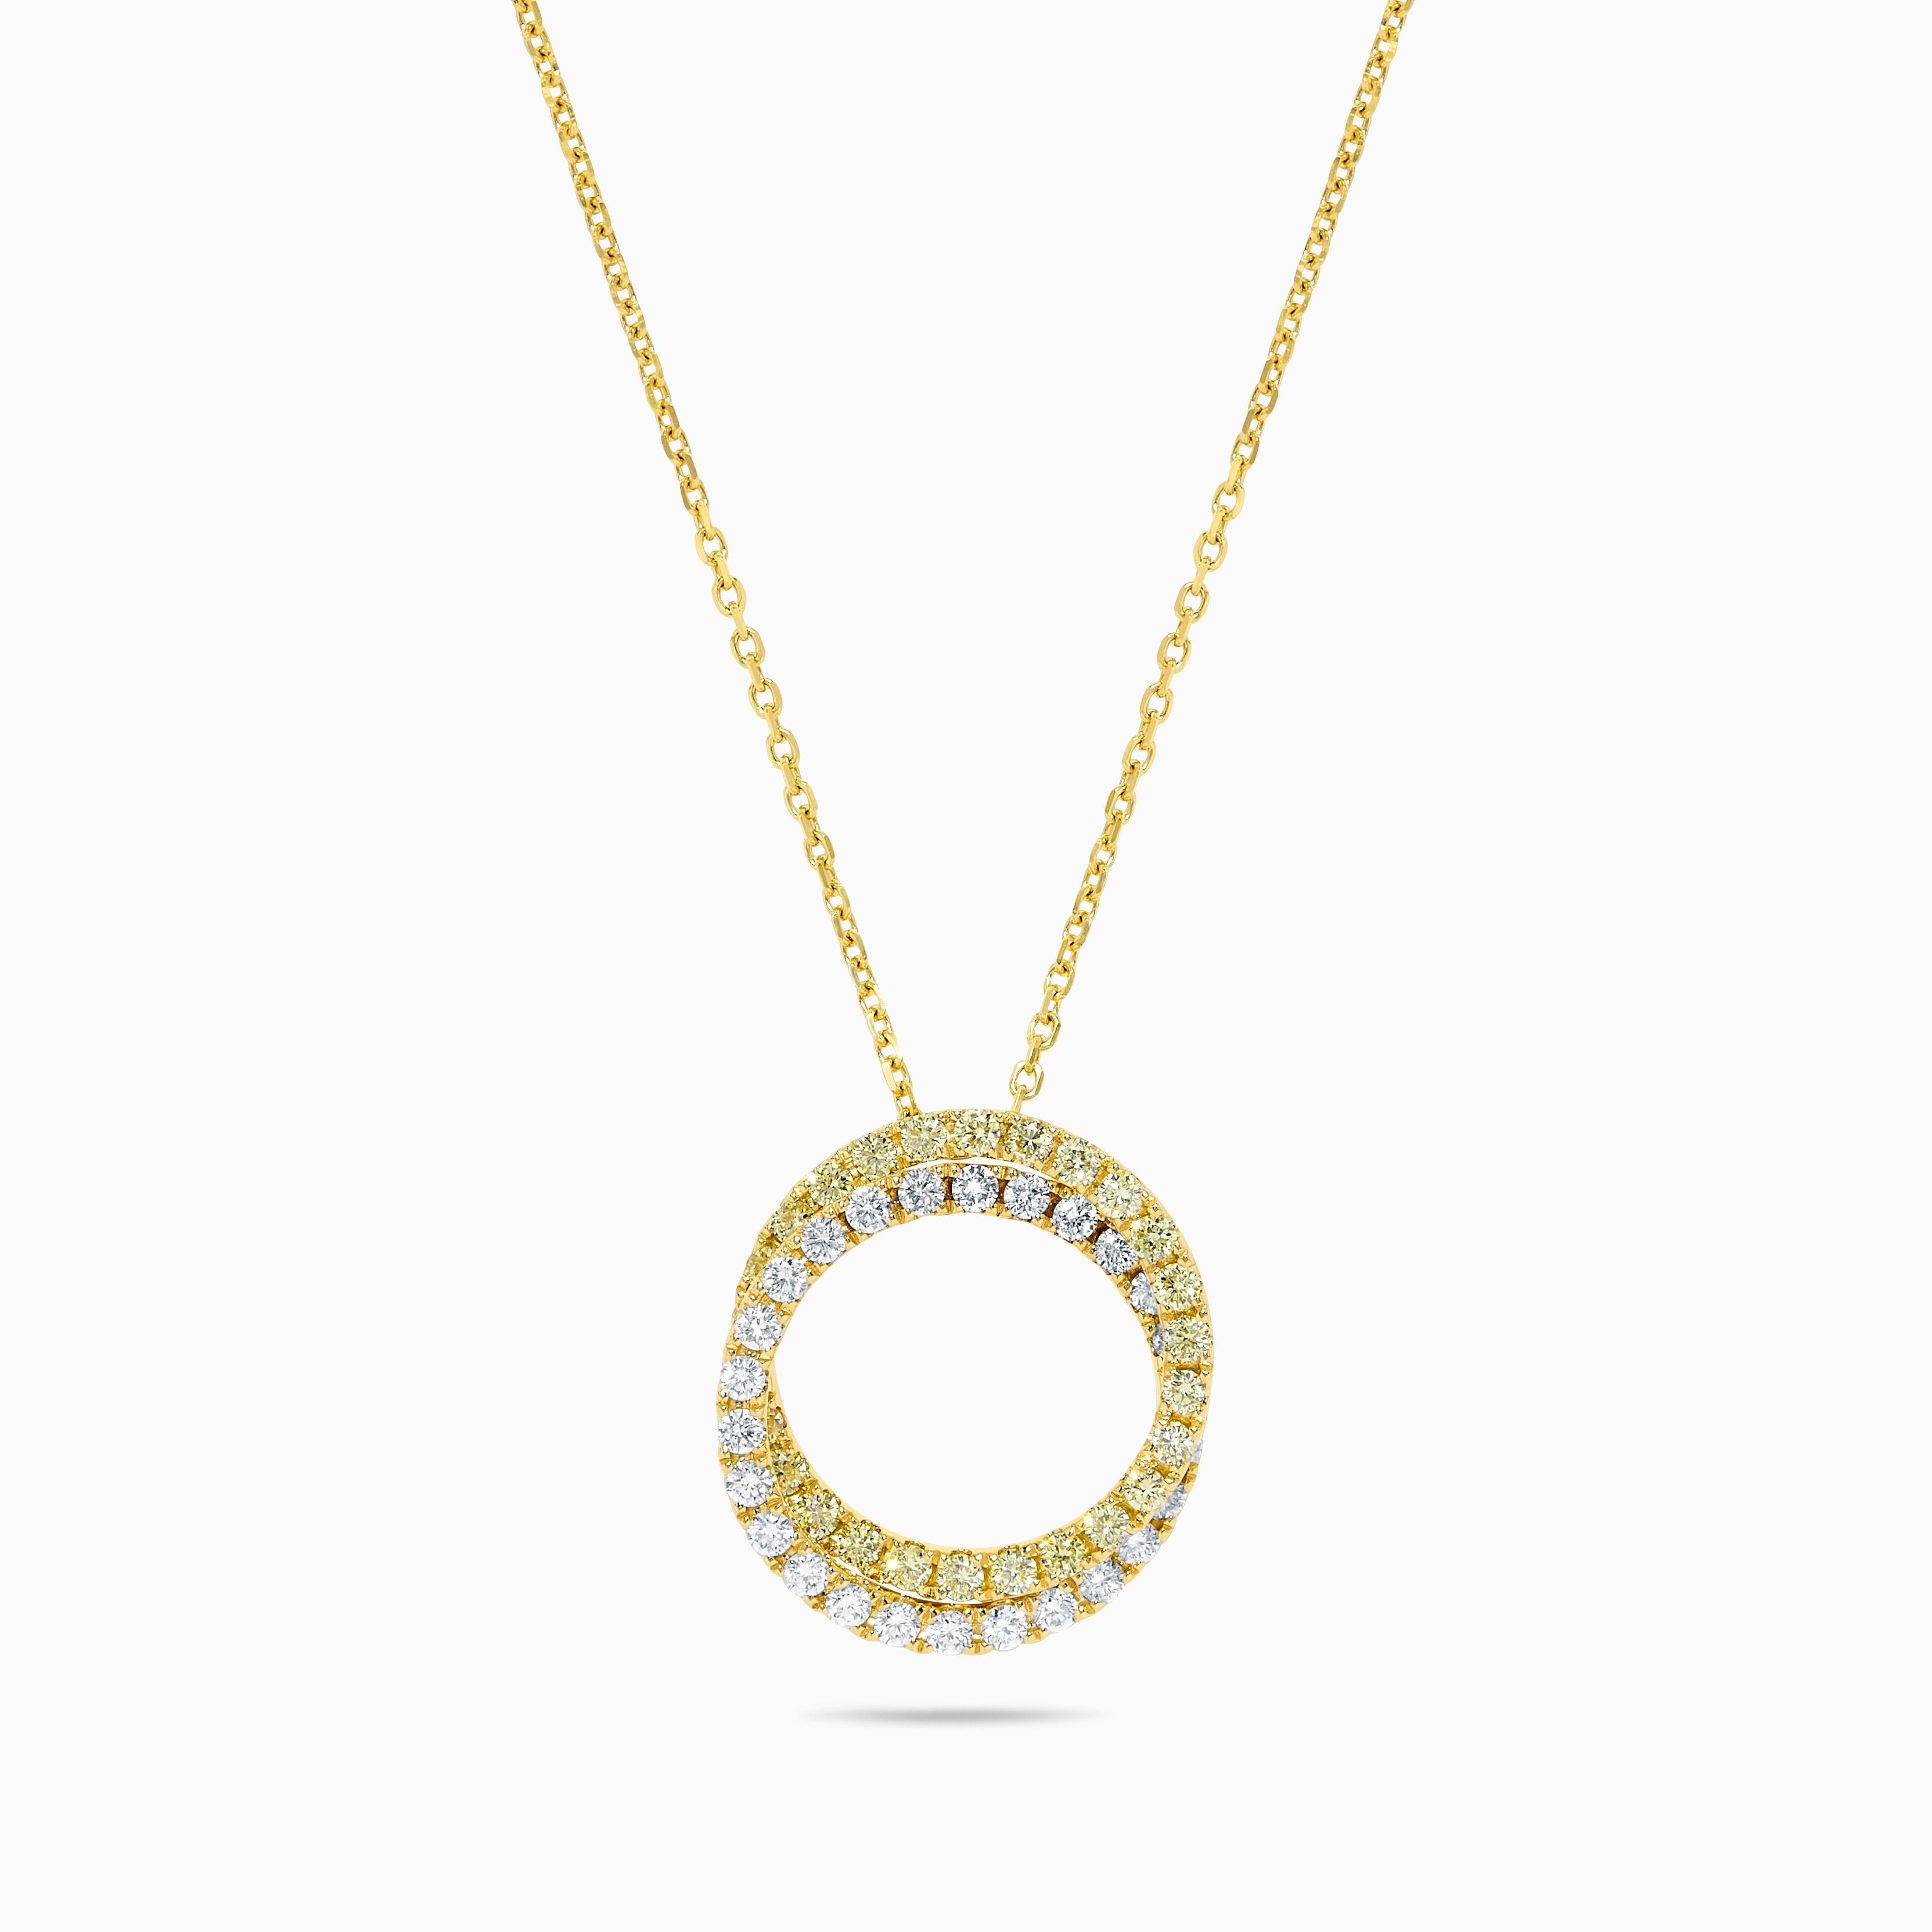 RareGemWorld's classic diamond pendant. Mounted in a beautiful 18K Yellow Gold setting with natural round yellow diamond melee complimented by natural round white diamond melee. This necklace is guaranteed to impress and enhance your personal